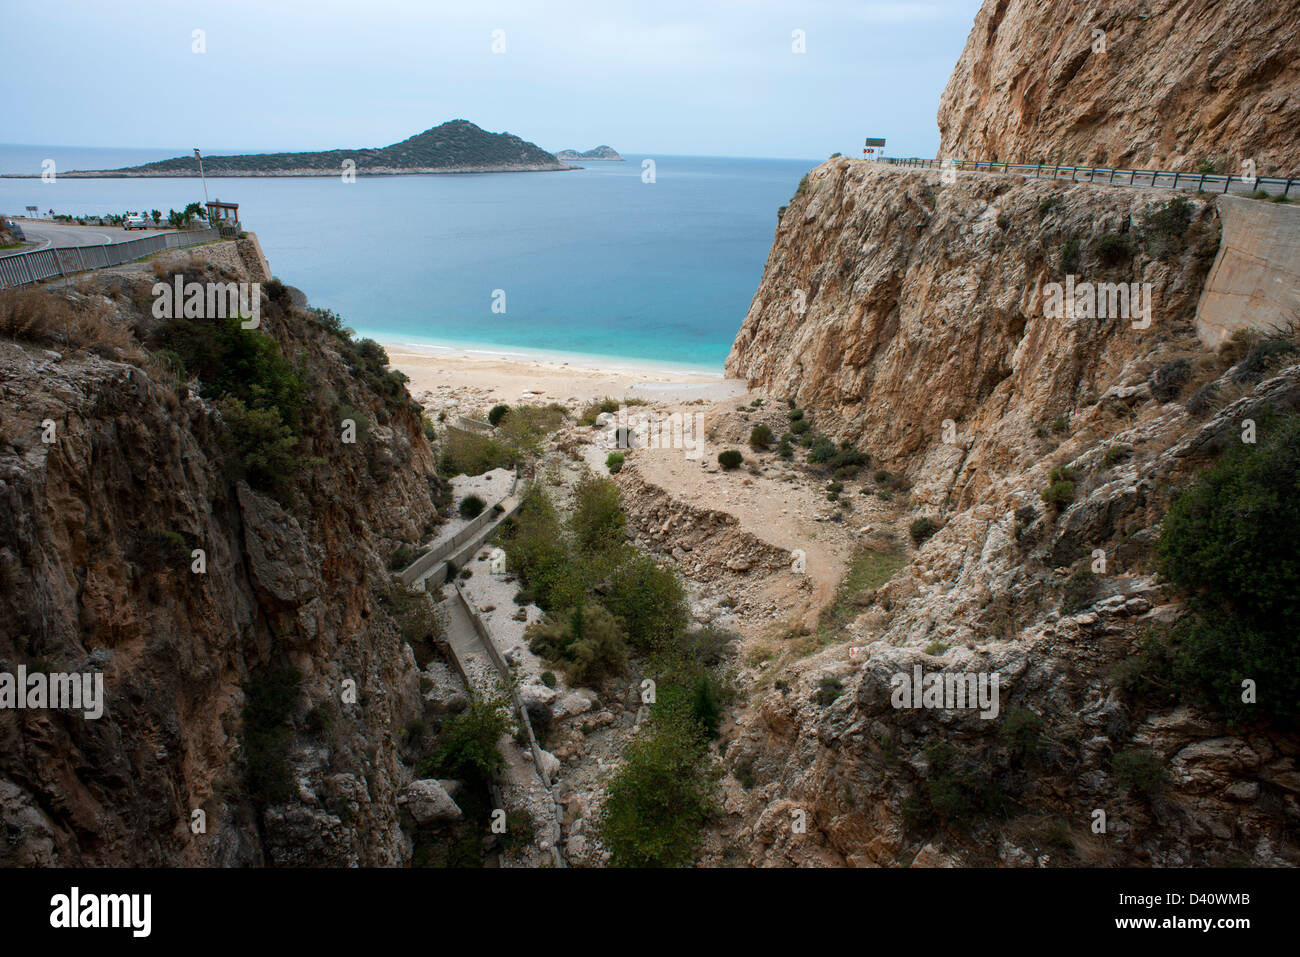 Kaputas beach and gorge near Kalkan on the Turquoise coast i n southern Turkey often used as a filming location. Stock Photo